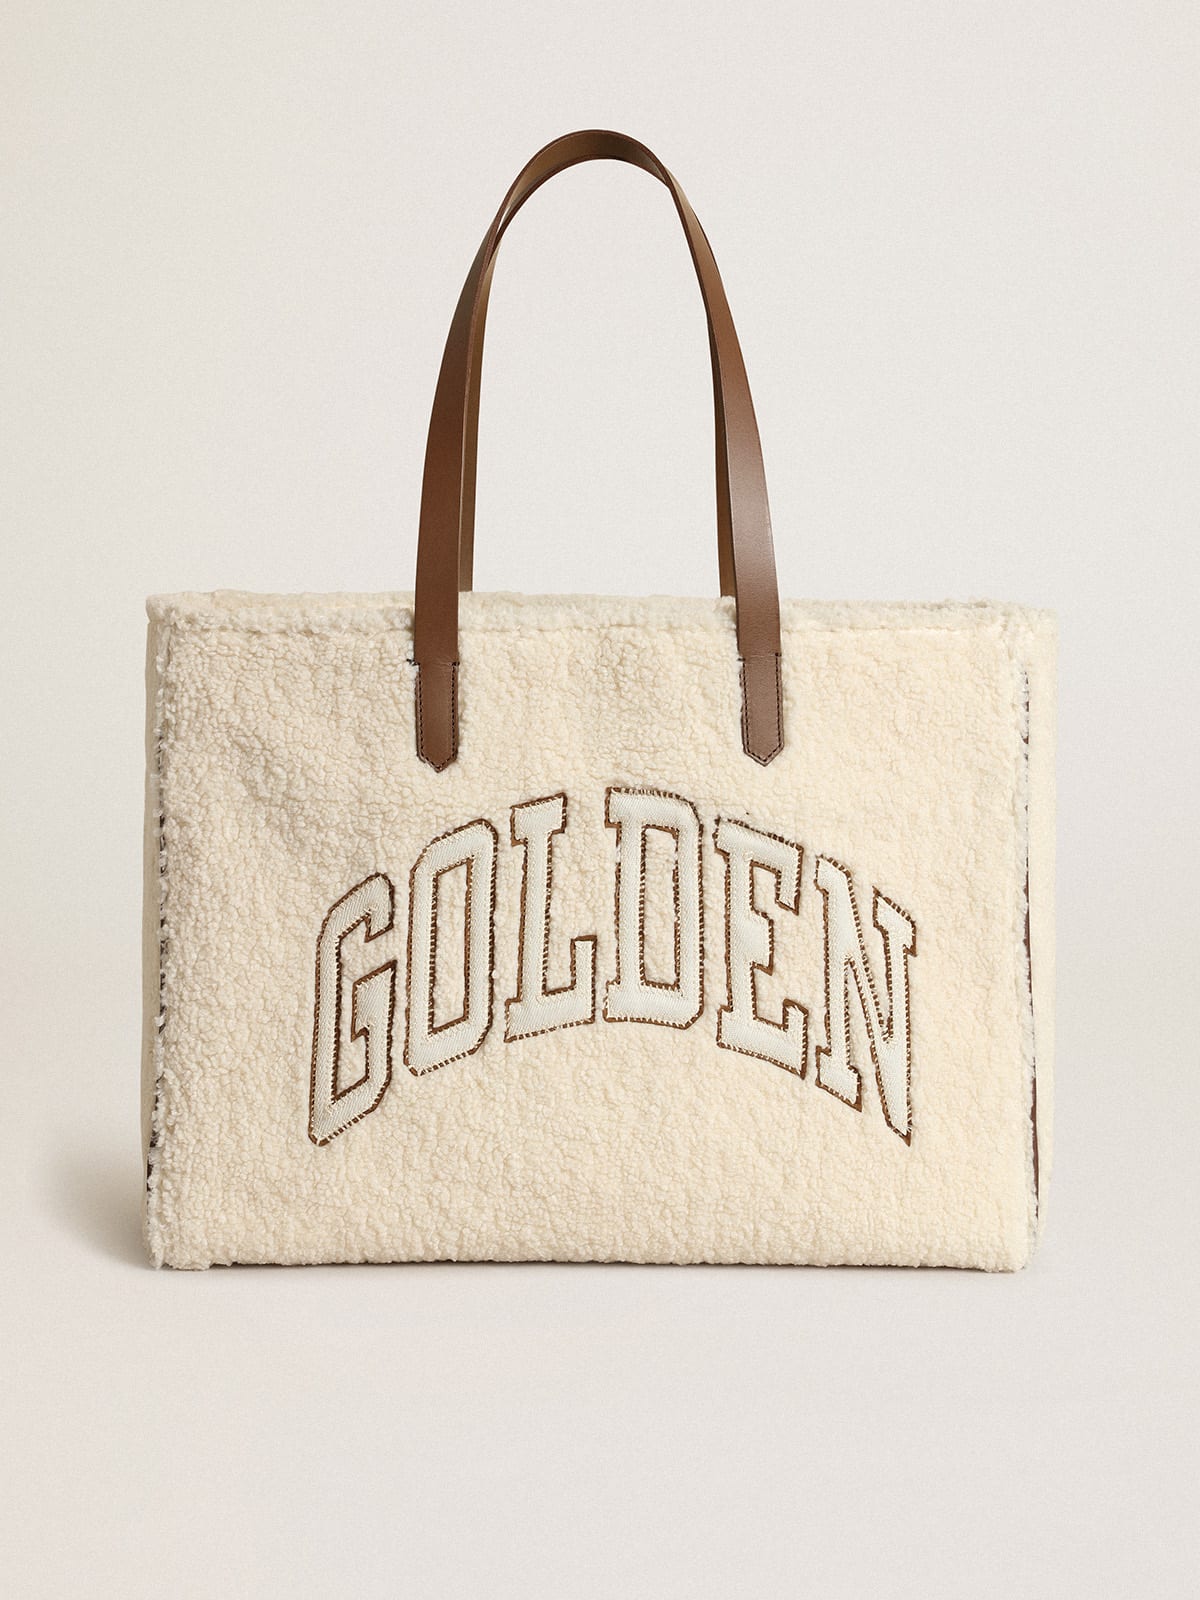 East-West California Bag in white faux fur with Golden lettering and contrasting handles